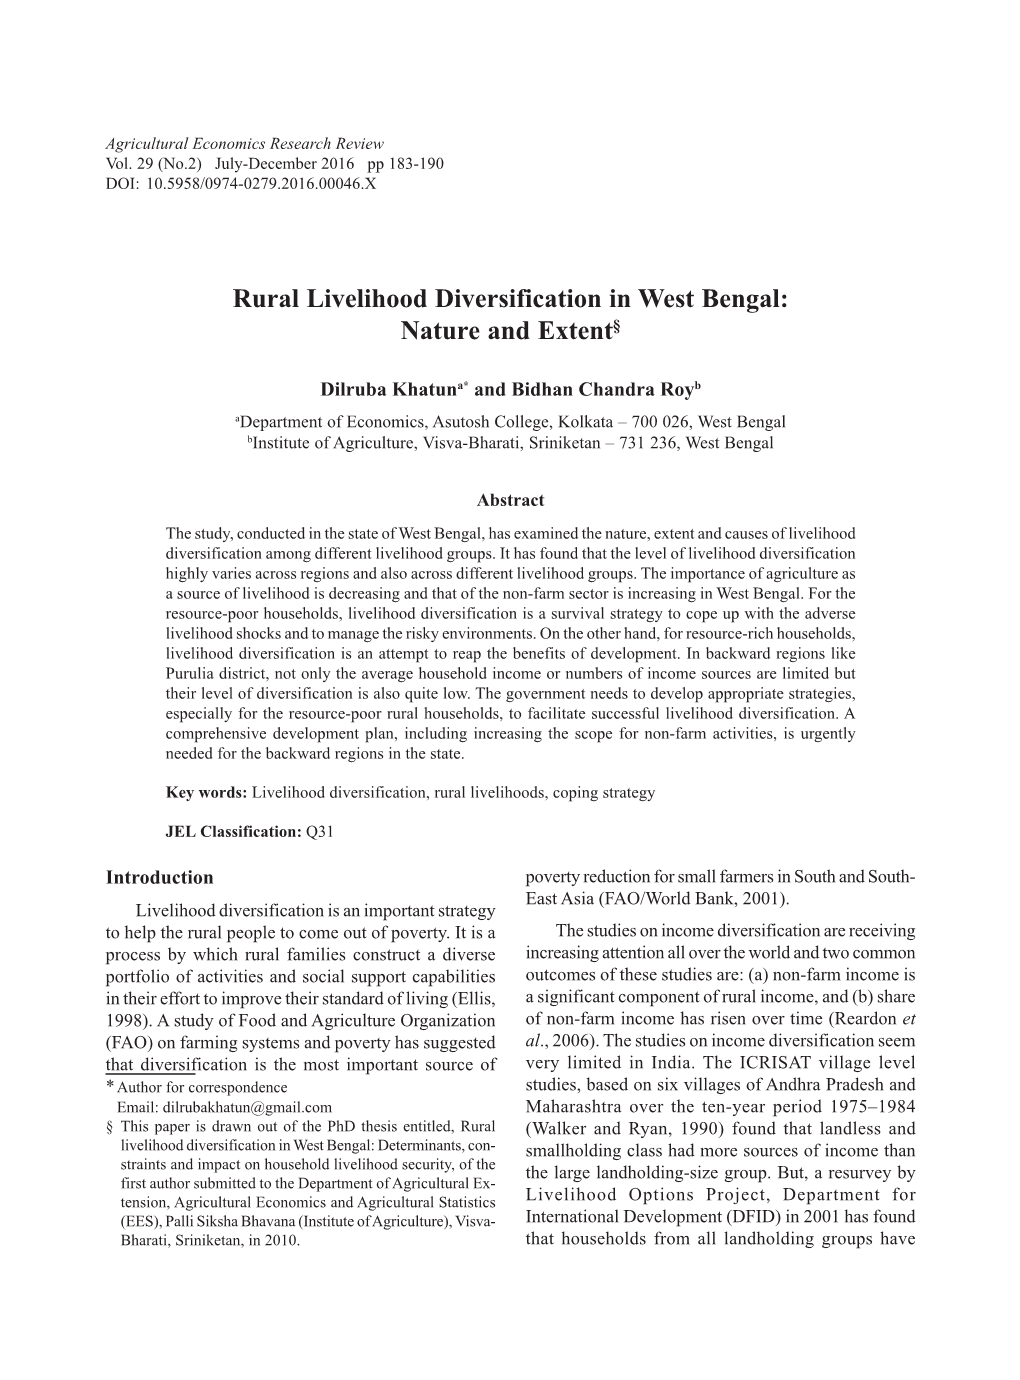 Rural Livelihood Diversification in West Bengal: Nature and Extent§